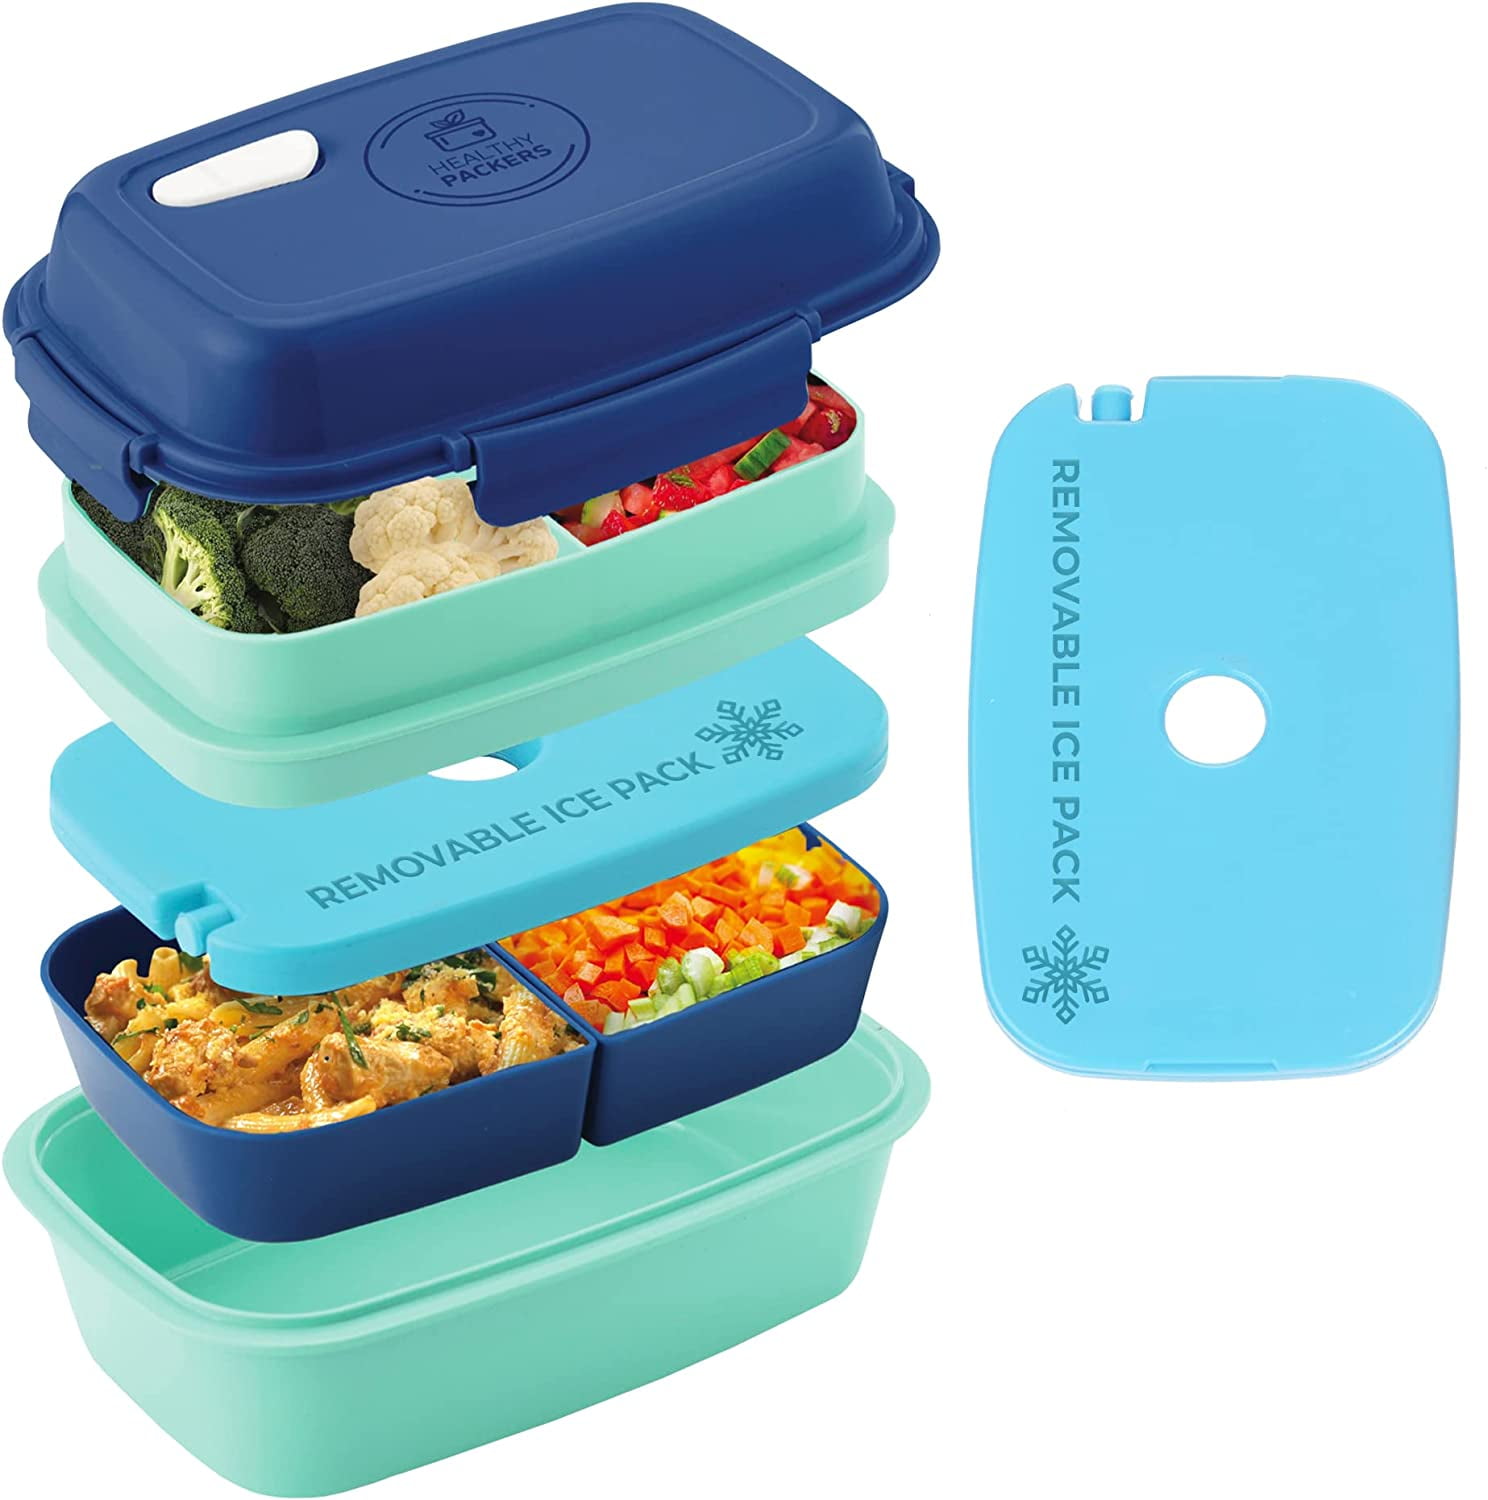 10 Meal Prep Food Plastic Storage Lunch Box Container Reusable Microwavable 22oz 